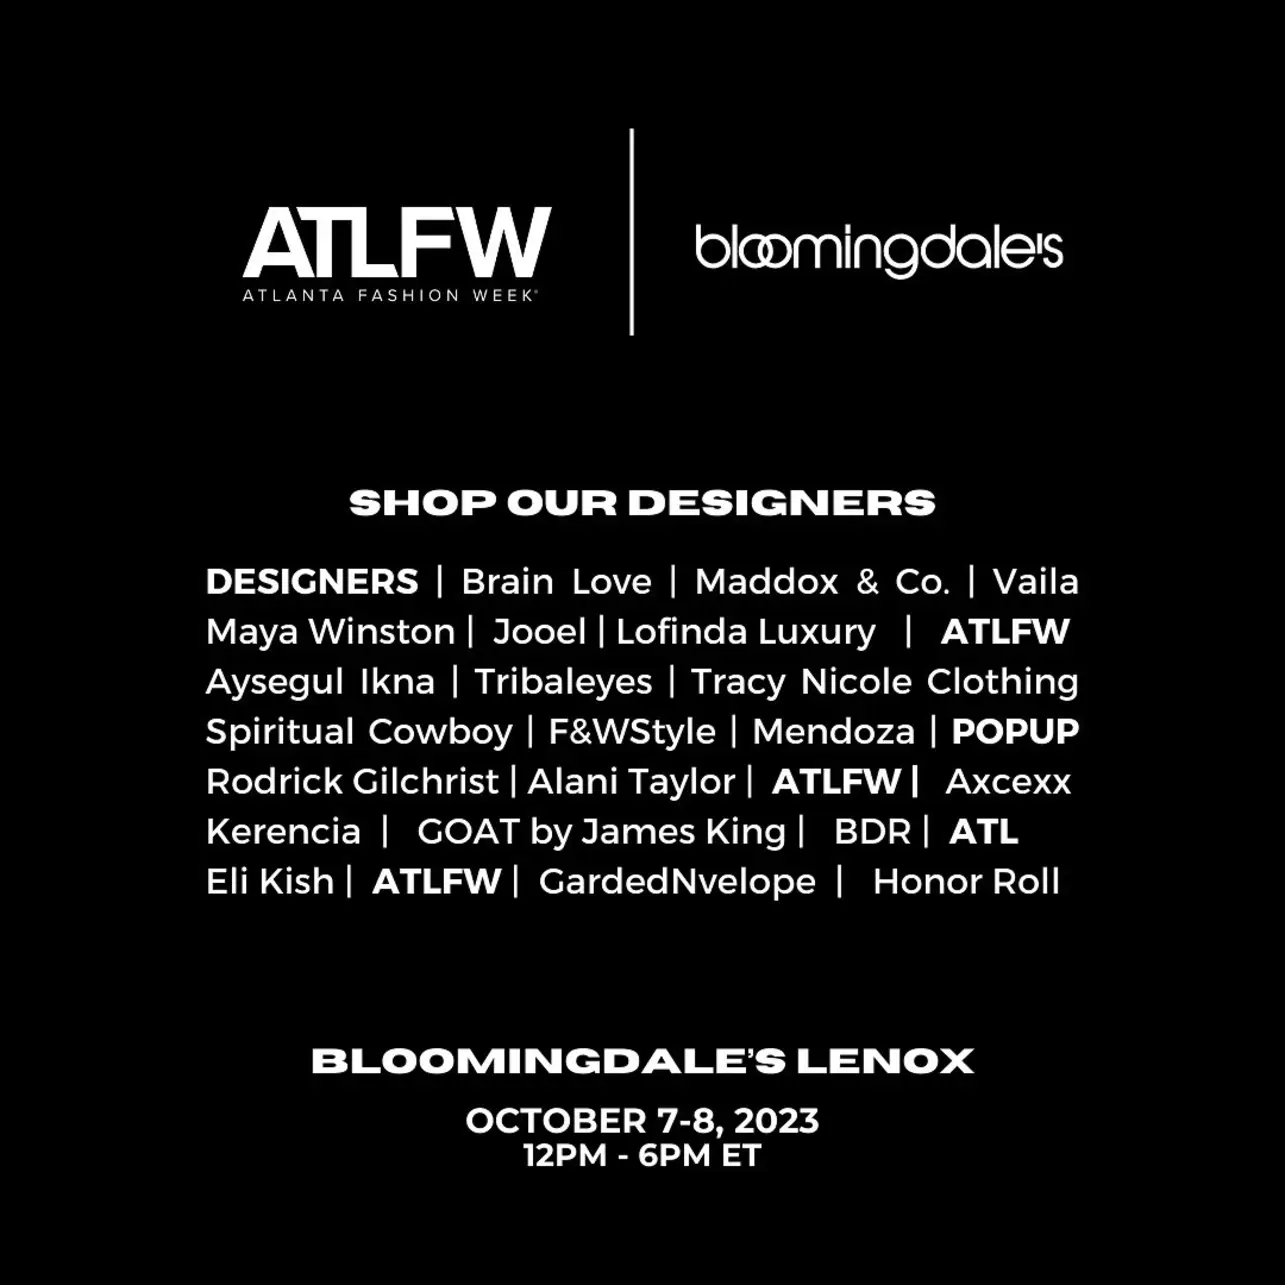 BLOOMINGDALE'S TO CREATE FESTIVAL FASHION POP-UPS